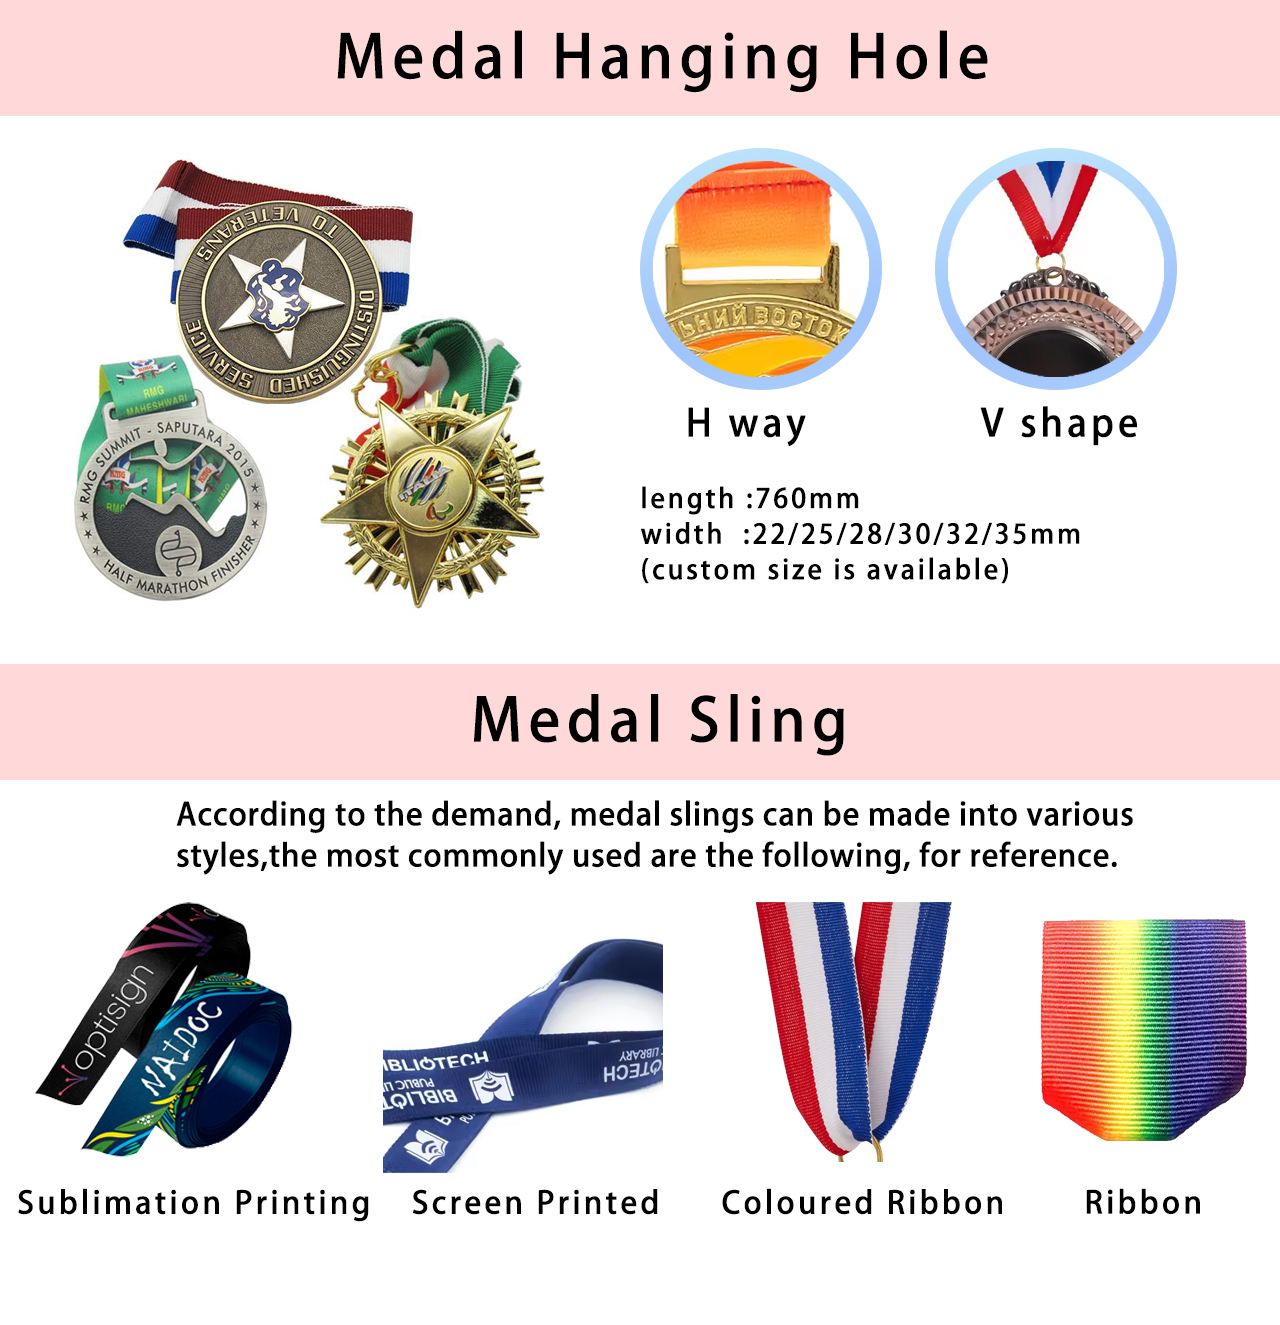 IT’S EASY TO CUSTOMIZE A MEDAL WITH A RIBBONptf